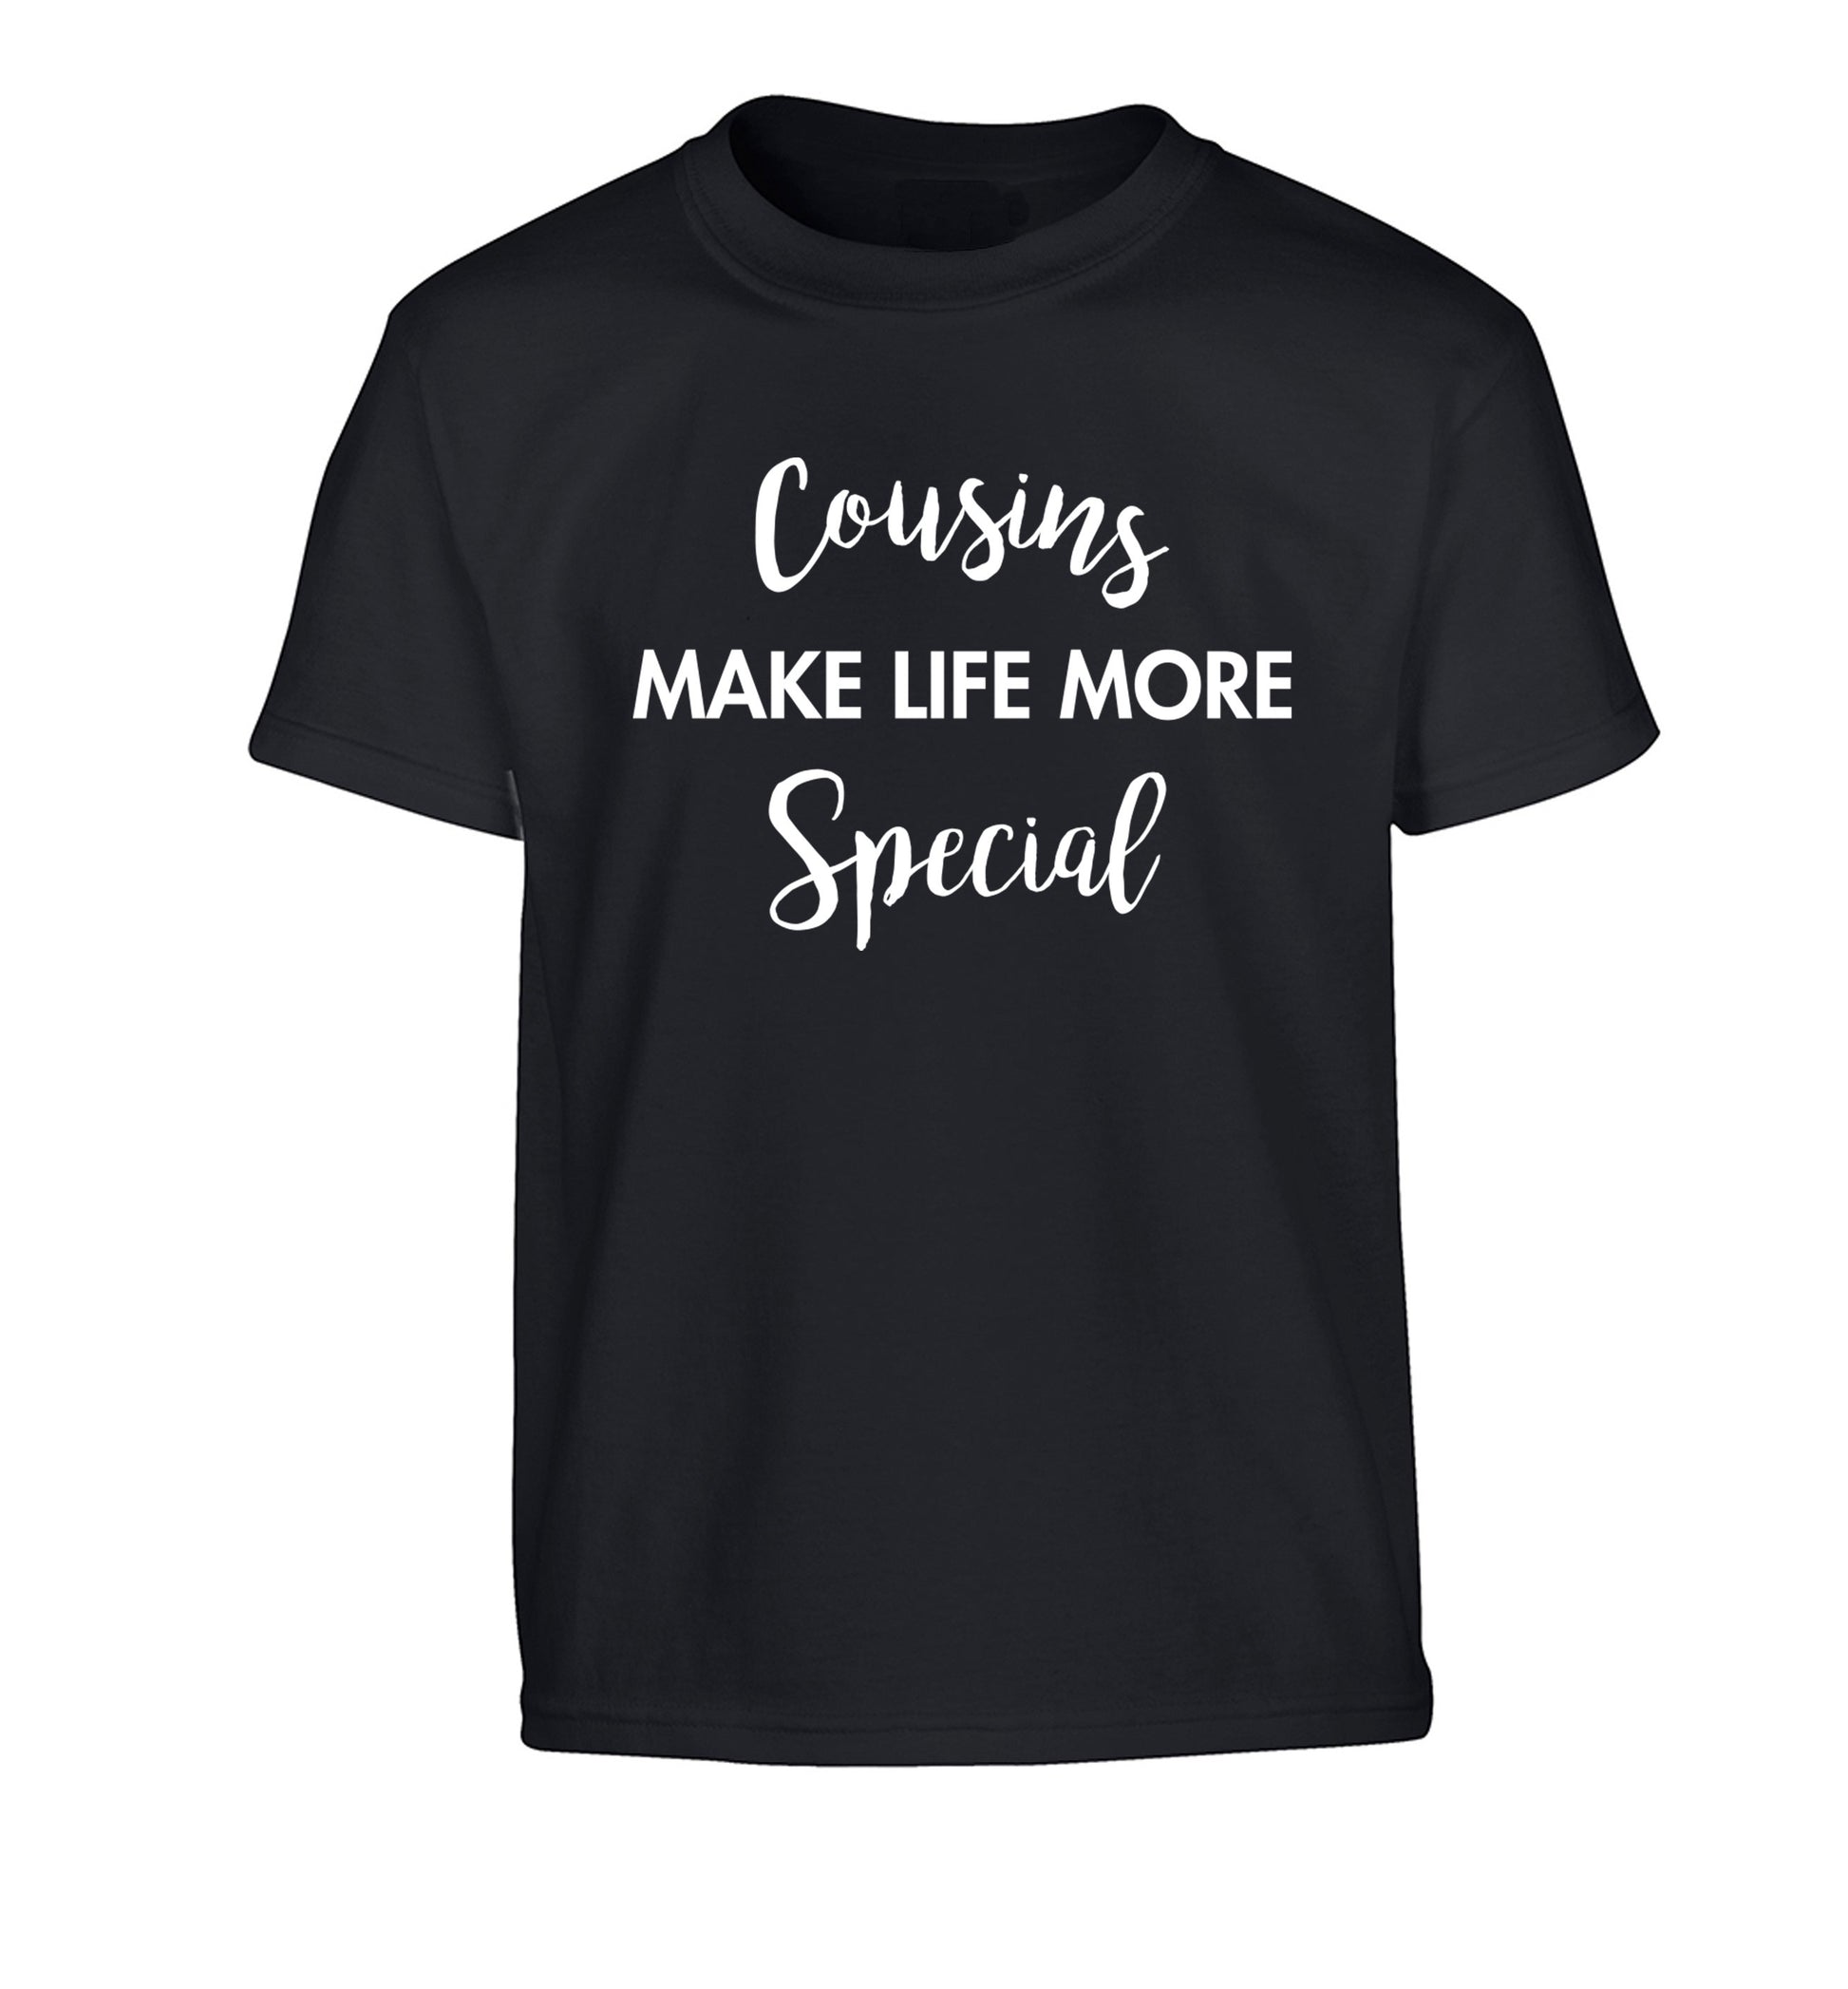 Cousins make life more special Children's black Tshirt 12-14 Years